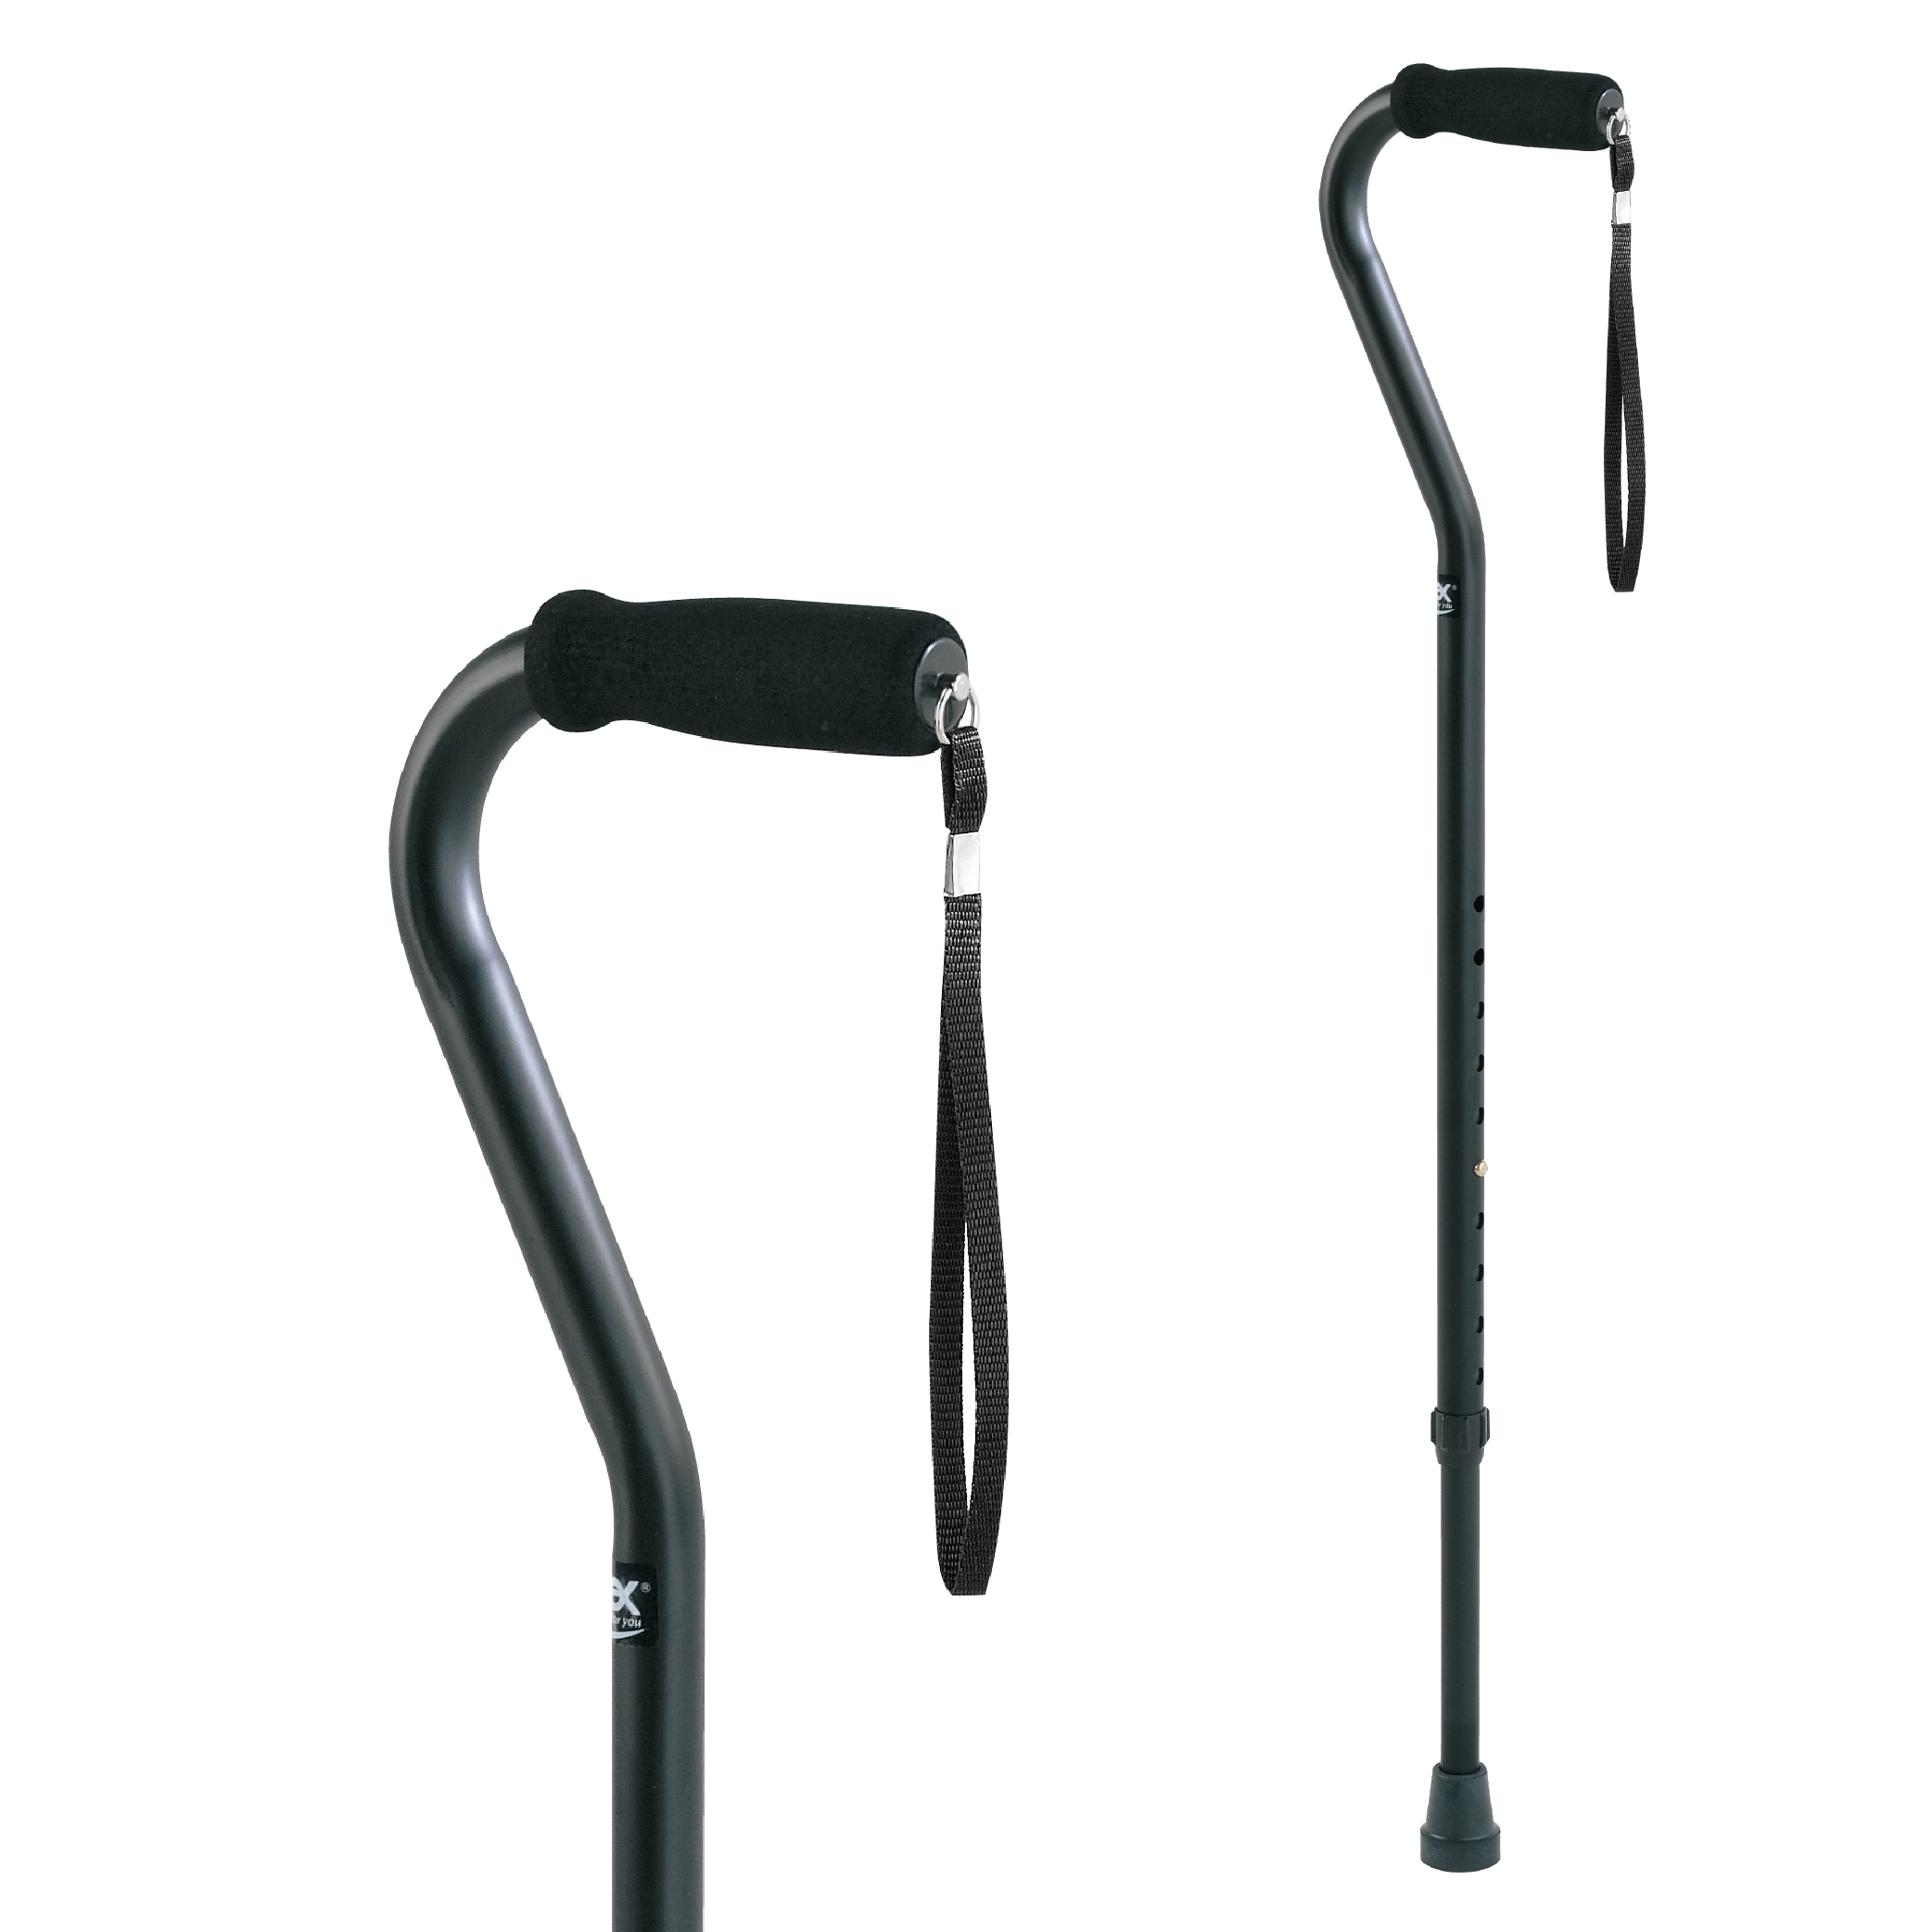 Carex Adjustable Walking Cane with Offset Handle for All Occasions, Cushioned Grip, Black, 250 lb Capacity - image 1 of 9